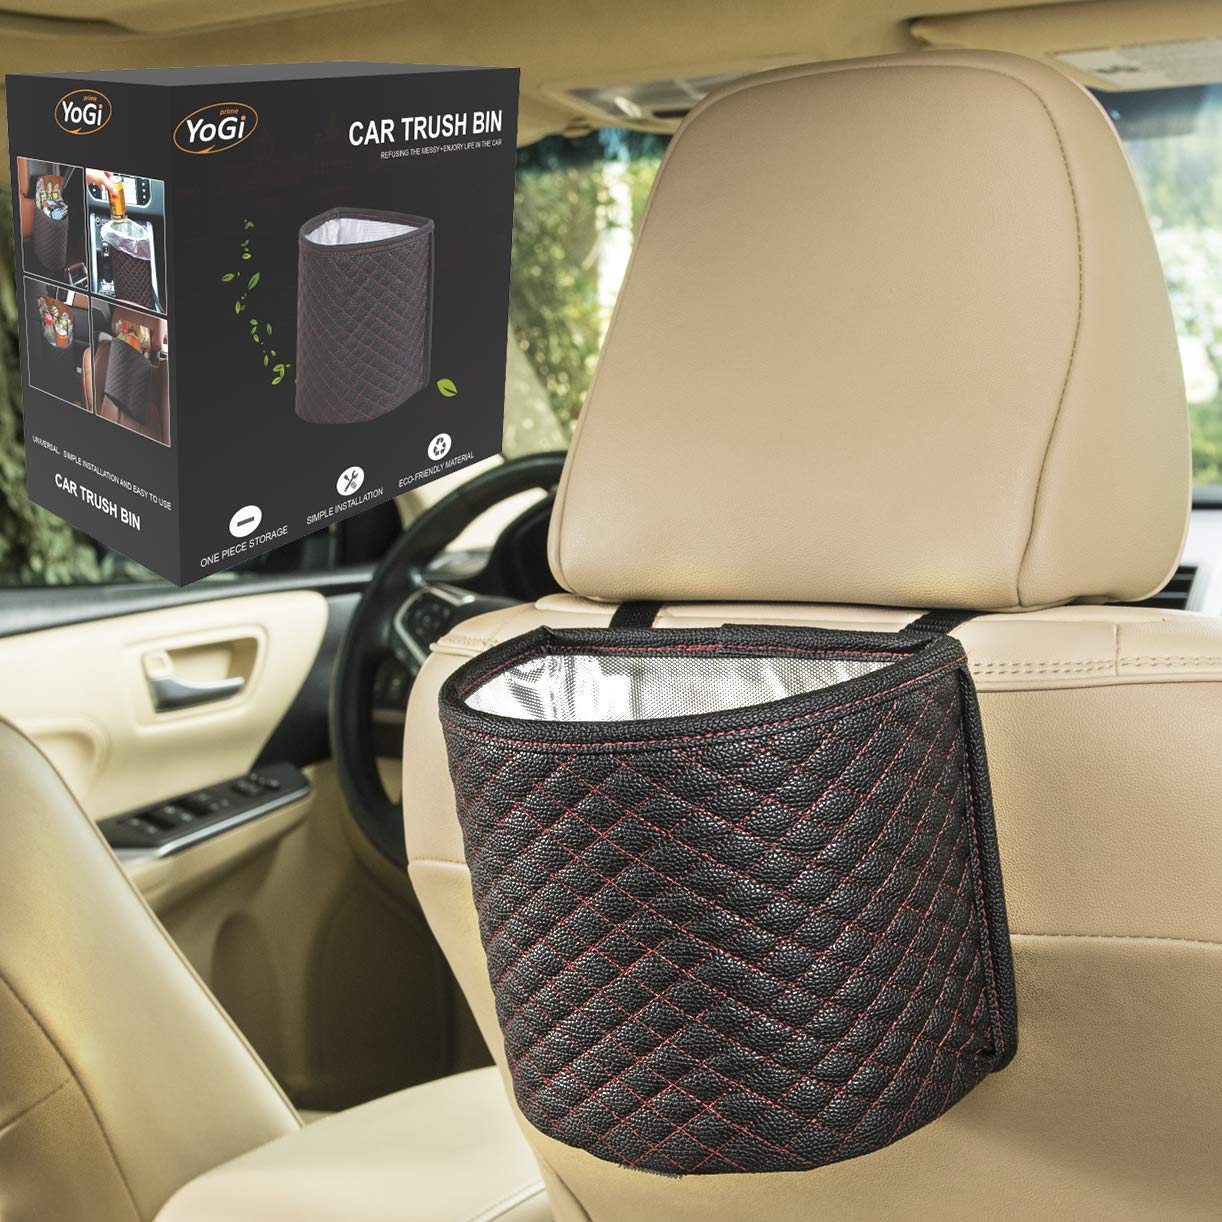 Buy Car Trash can - Black Garbage Bag for Your auto with Back seat  hangings, Elegante Well Design Cars Bags and bin with headrest Holder,Floor  Waterproof Mini Container Perfect Best Accessories Online